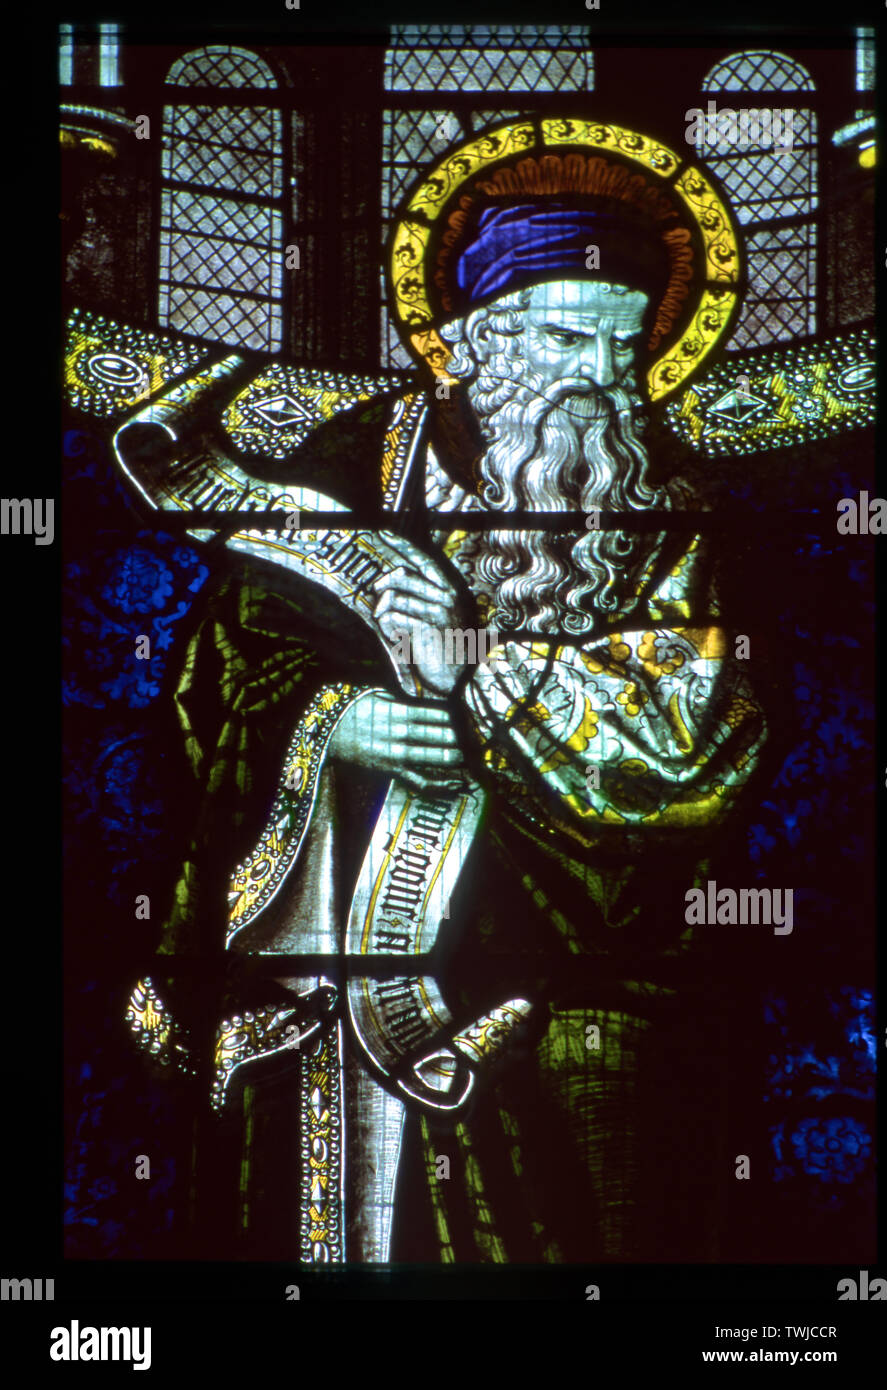 Stained glass window, Moses, St Edmund's, Assington, Suffolk, UK. Stock Photo